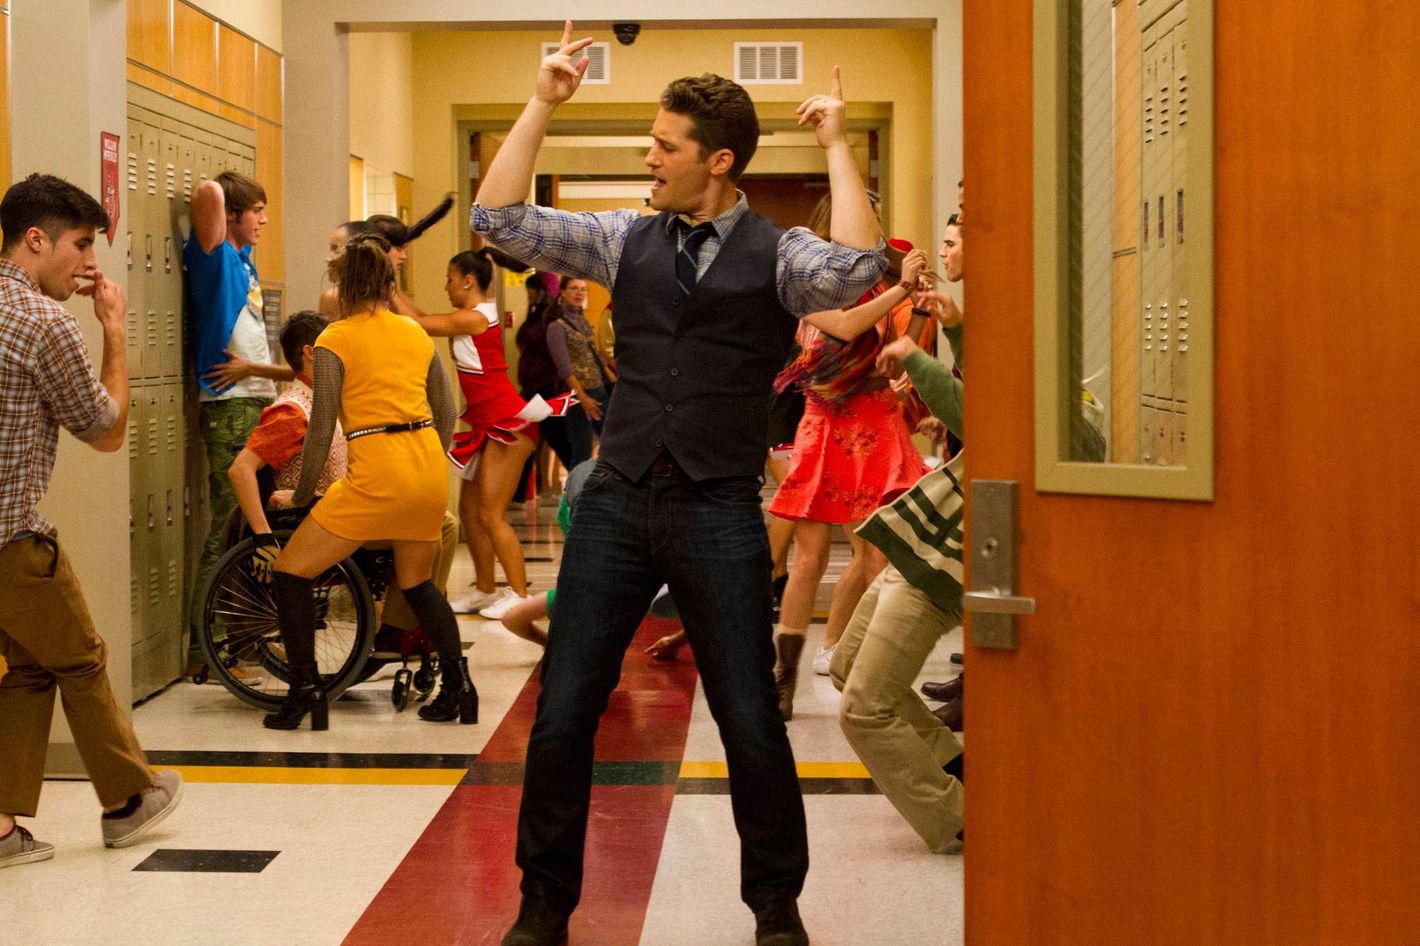 Who died in glee season 5 episode 15?